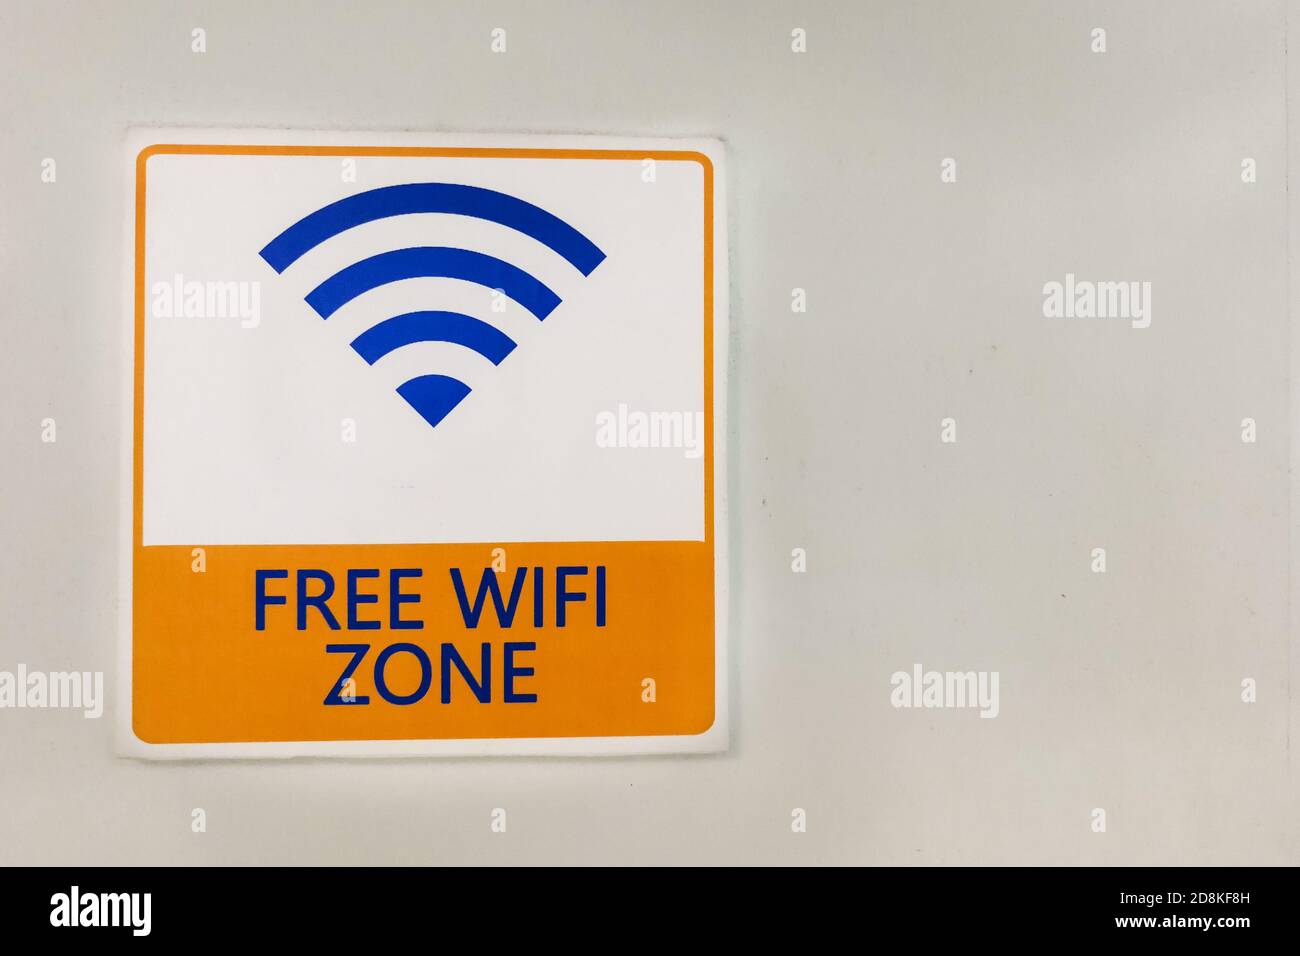 Free Wifi Zone word signage at public area for patron's convenience Stock Photo